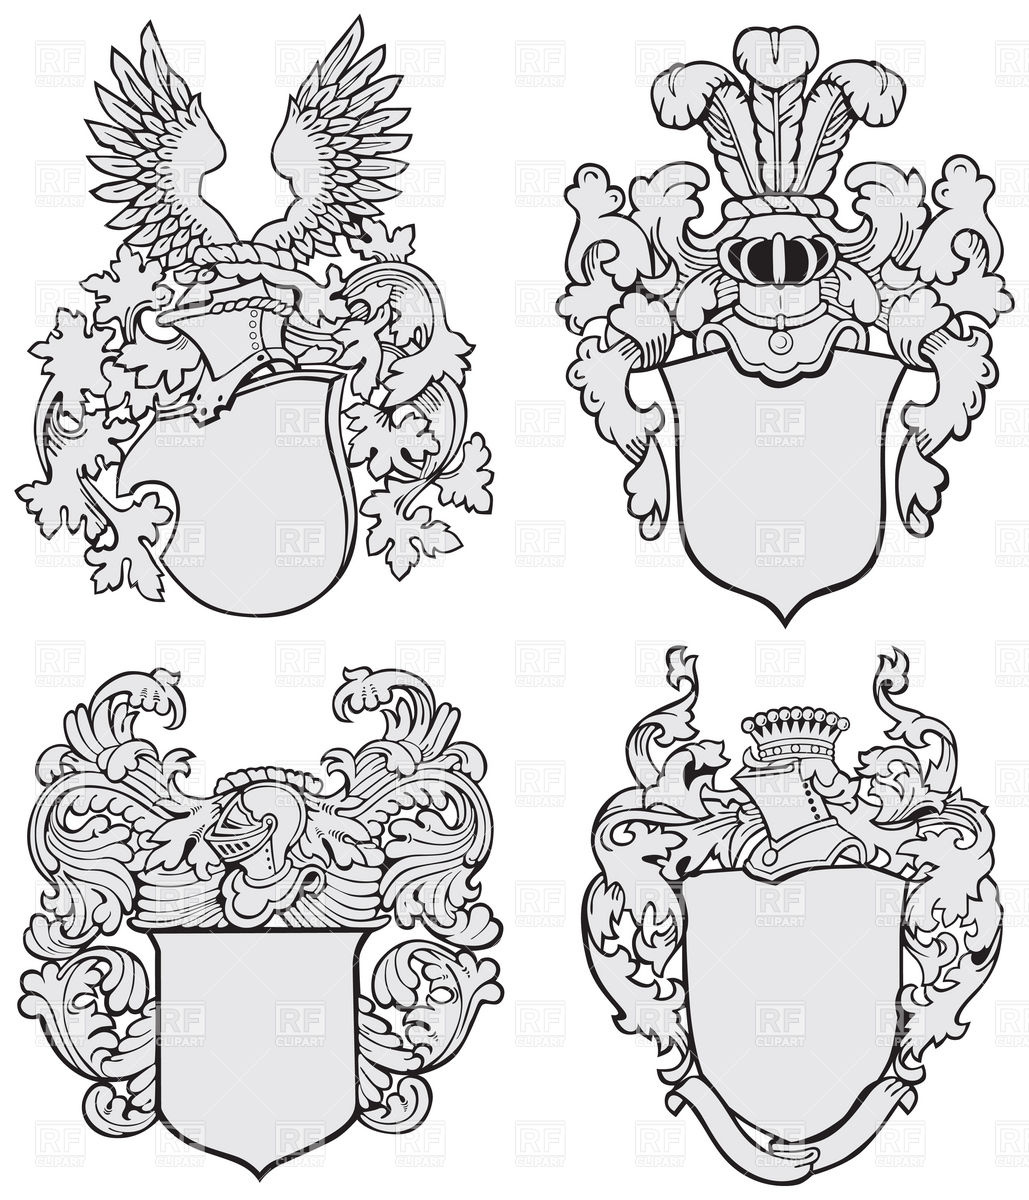 Knightly Royal Coats Of Arms   Medieval Heraldic Elements And Emblems